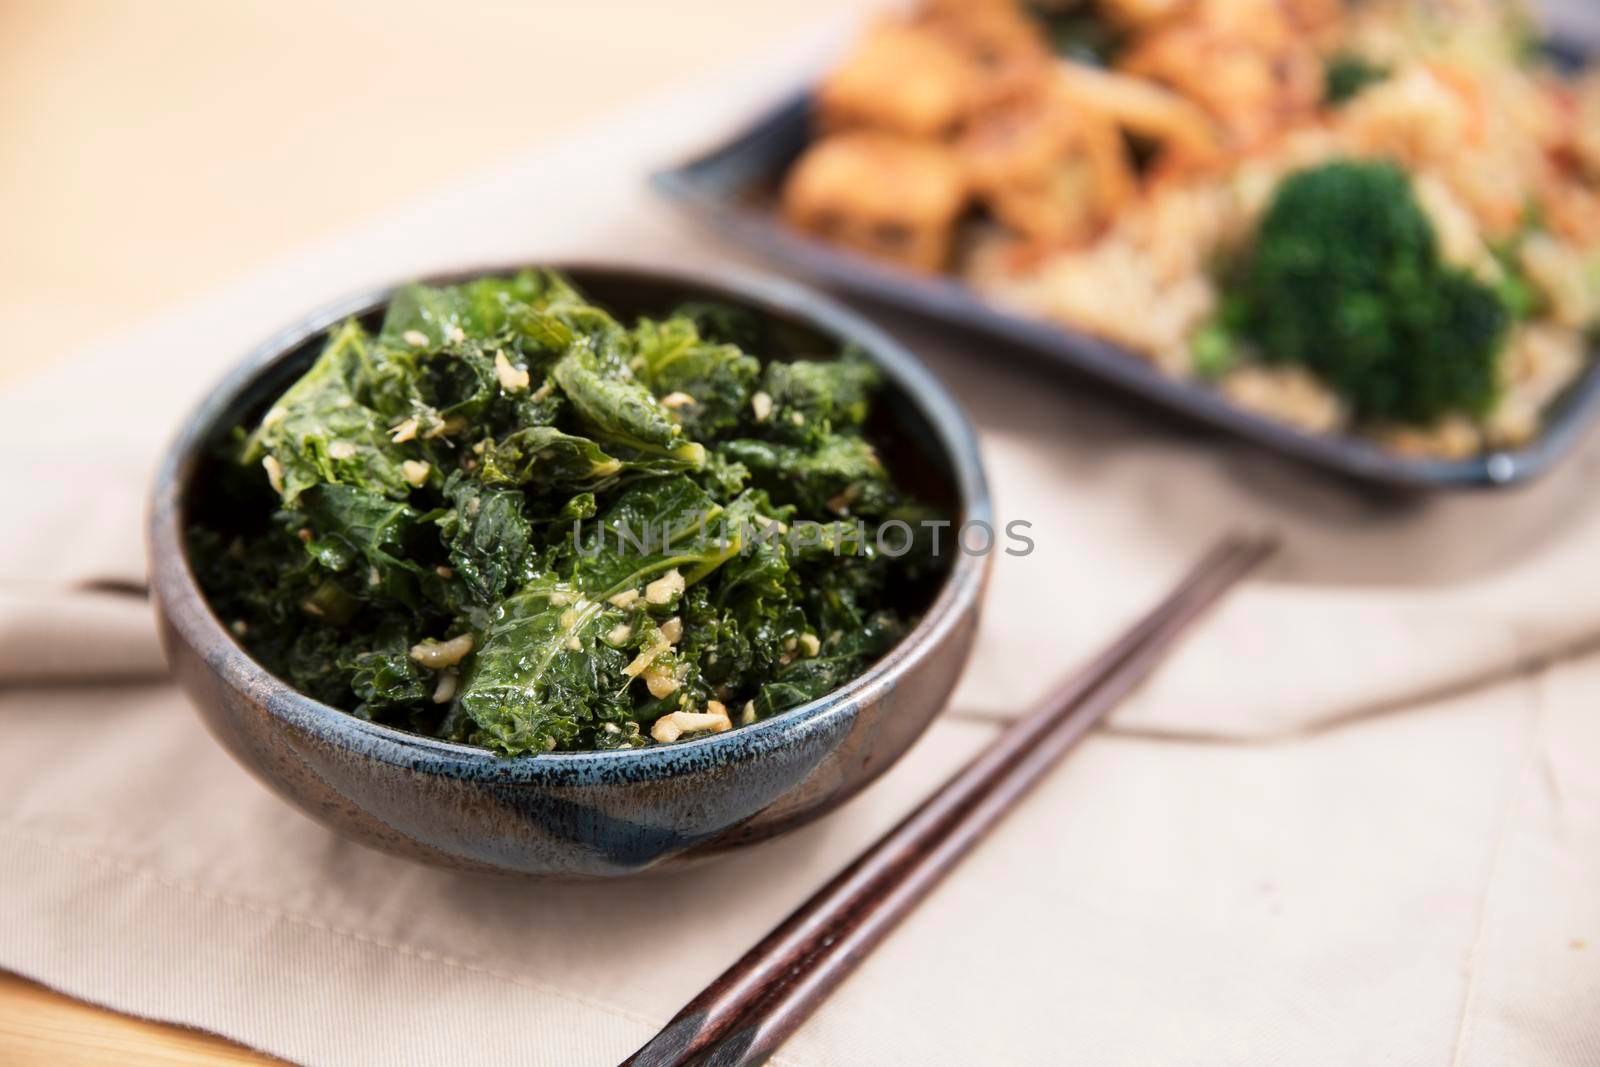 Stir fried kale with ginger and garlic